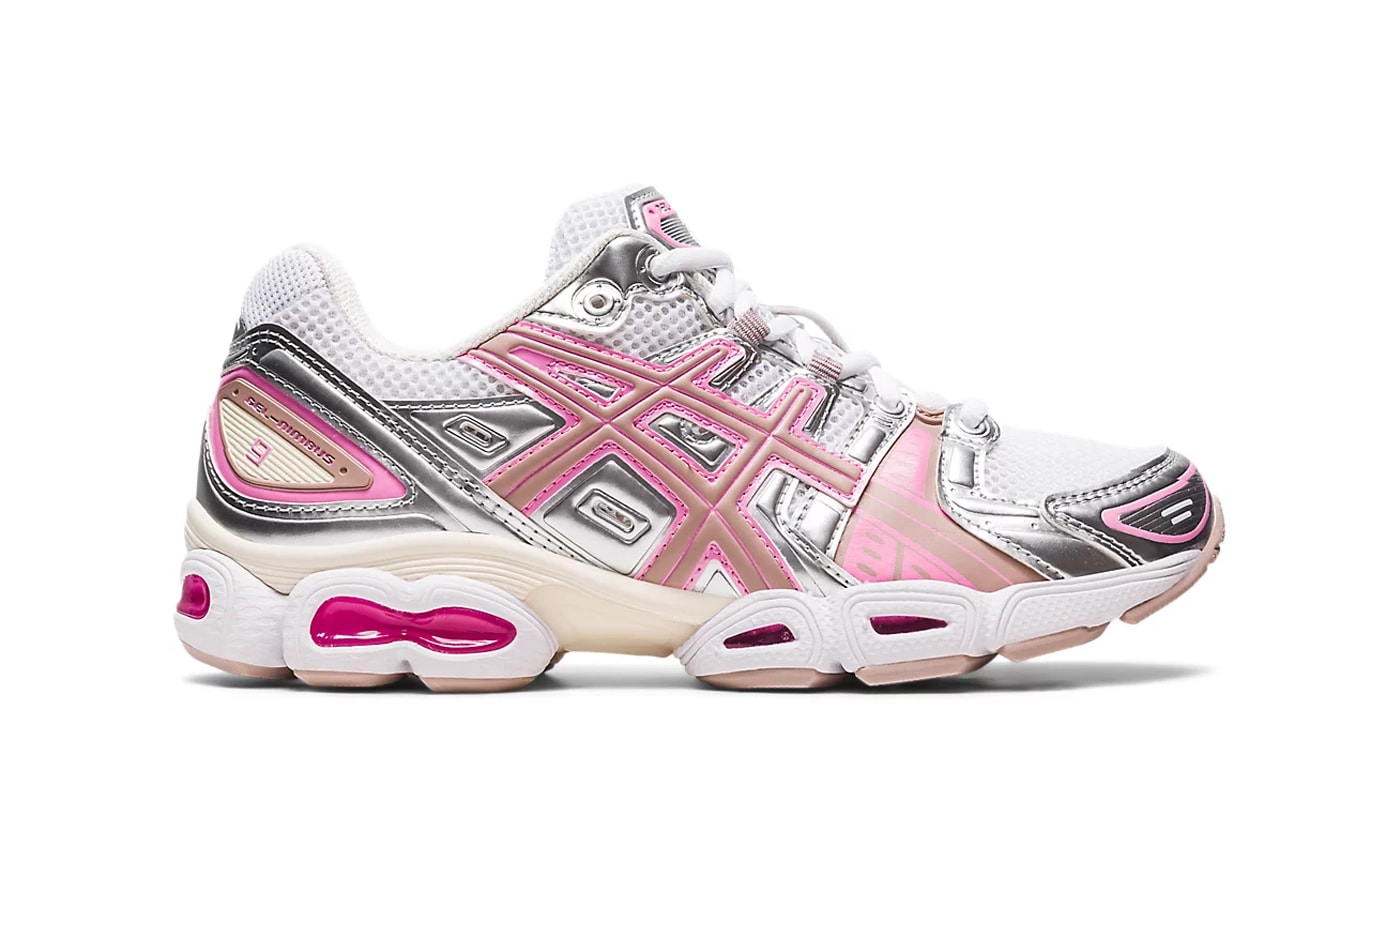 ASICS GEL-Nimbus 9 Surfaces in Candy Floss